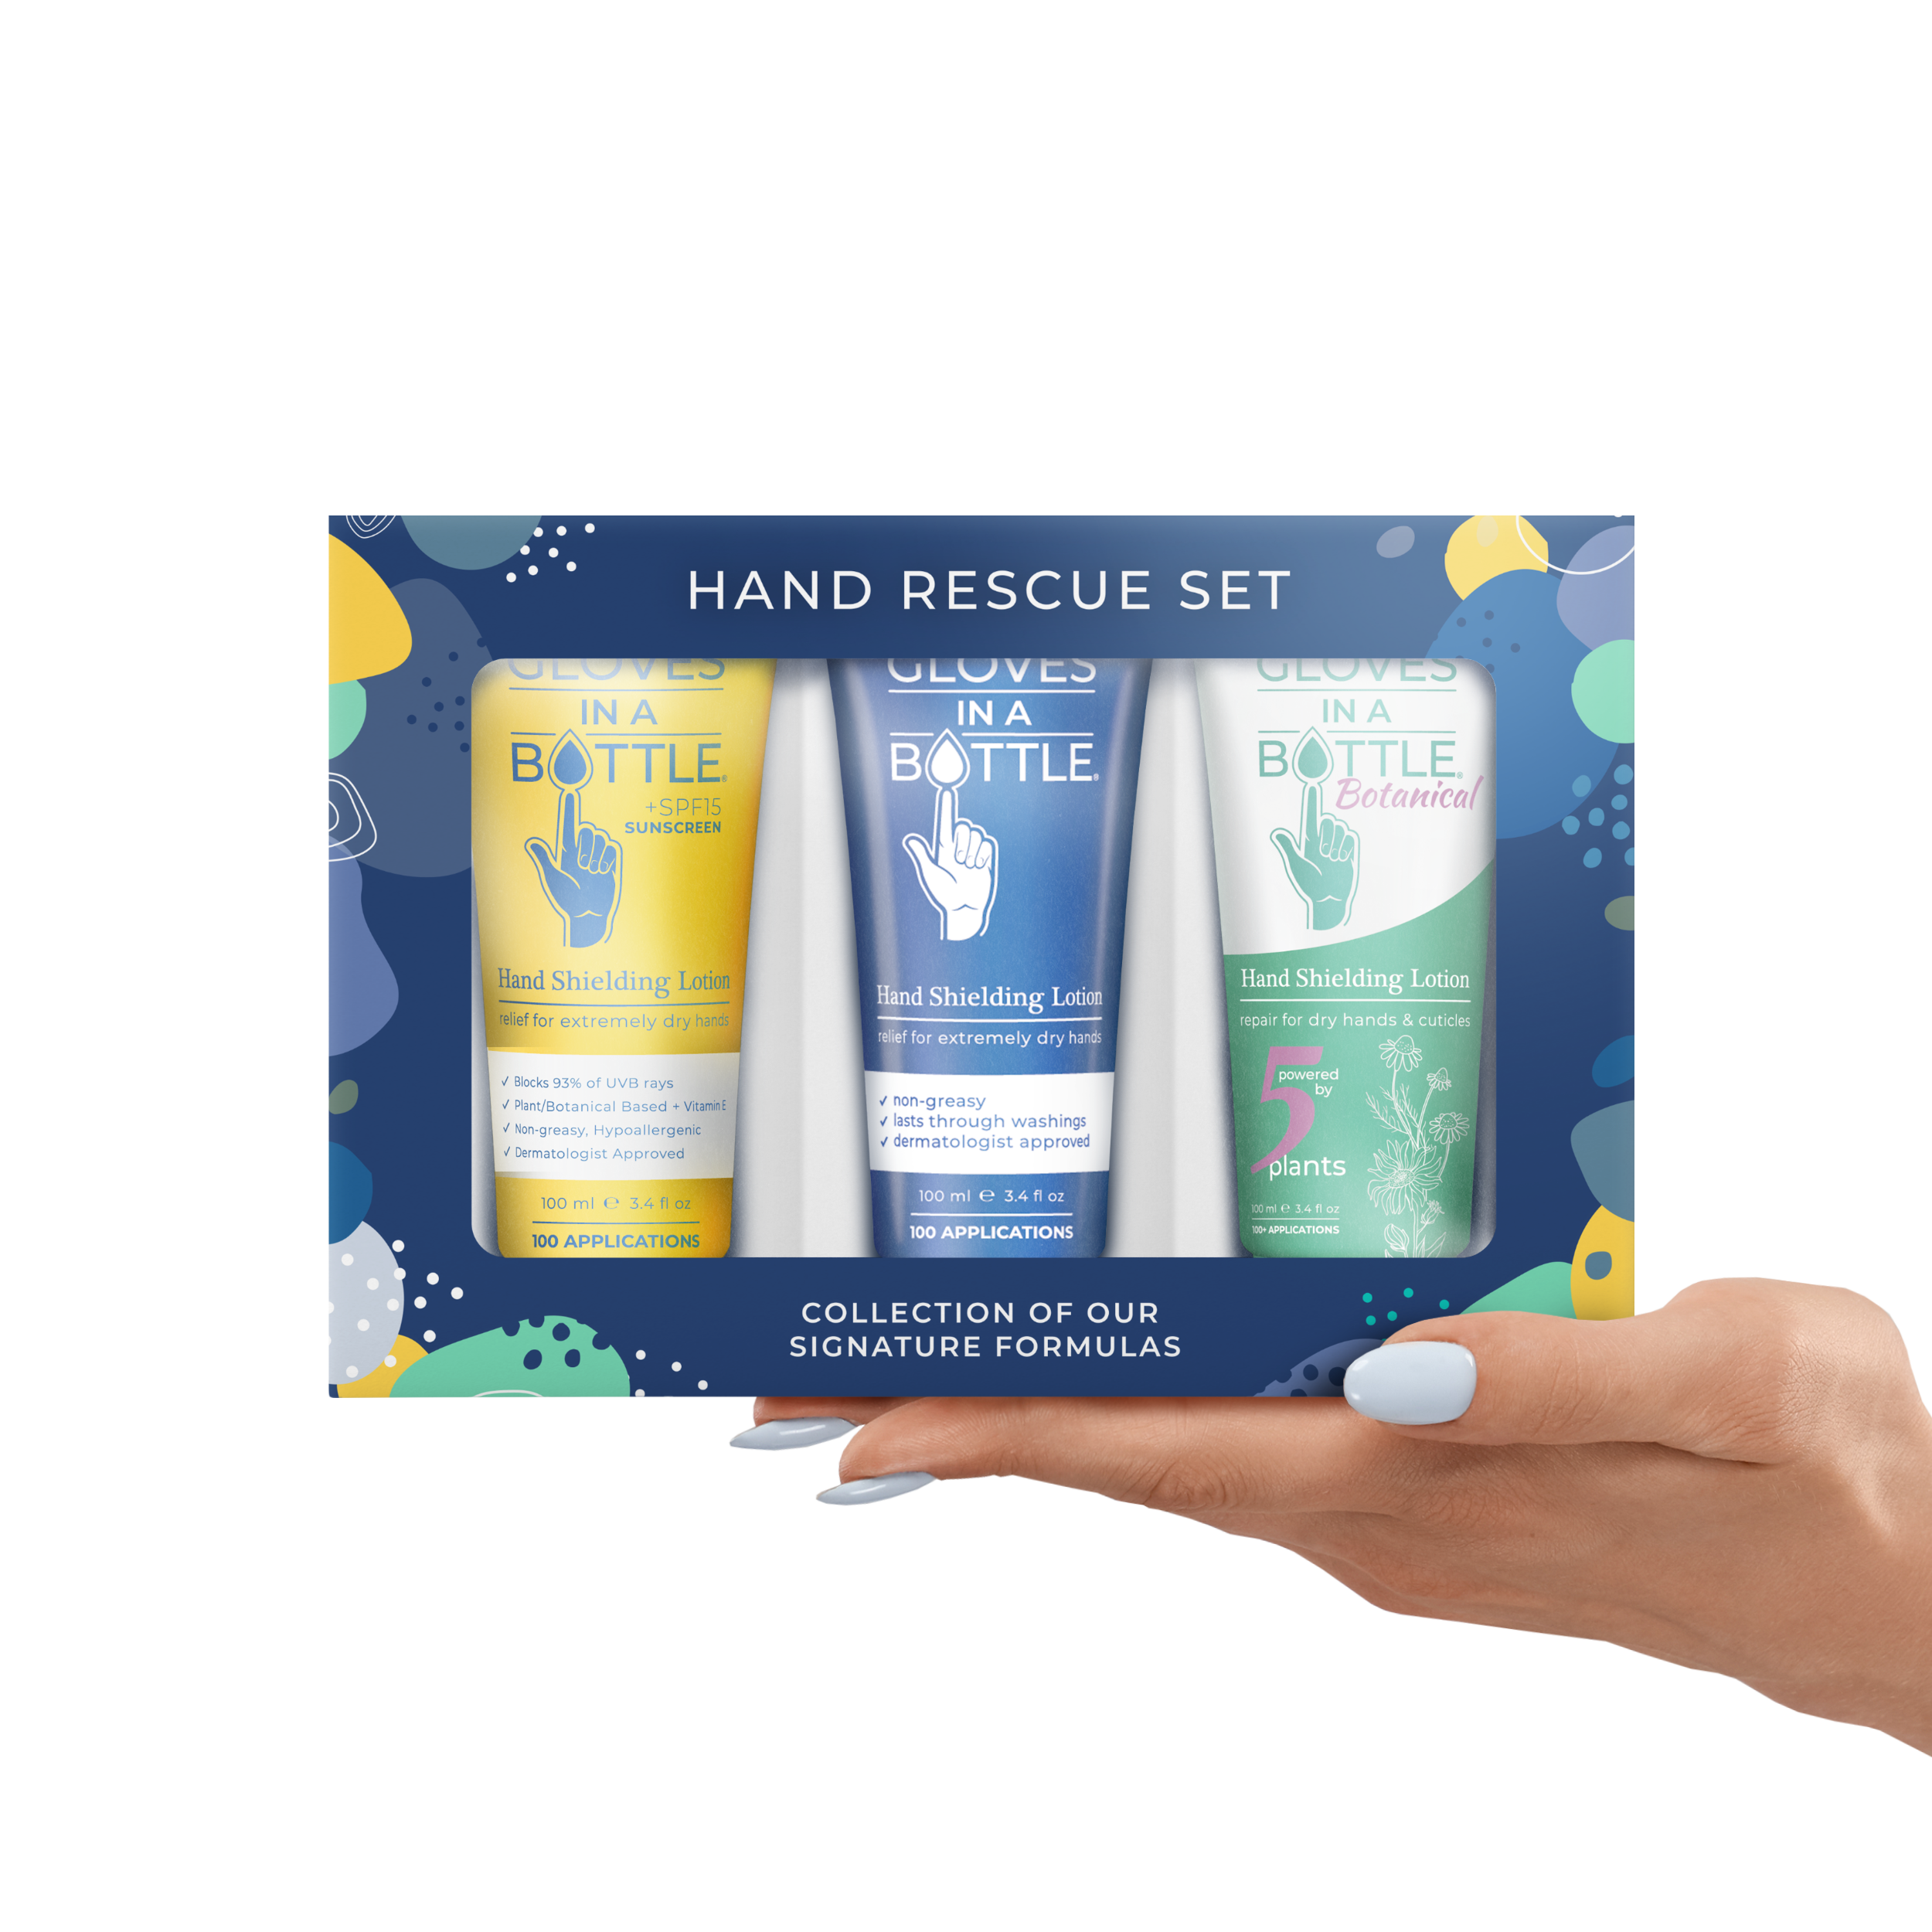 Our Gloves In A Bottle Botanical Tube is perfect for anyone and